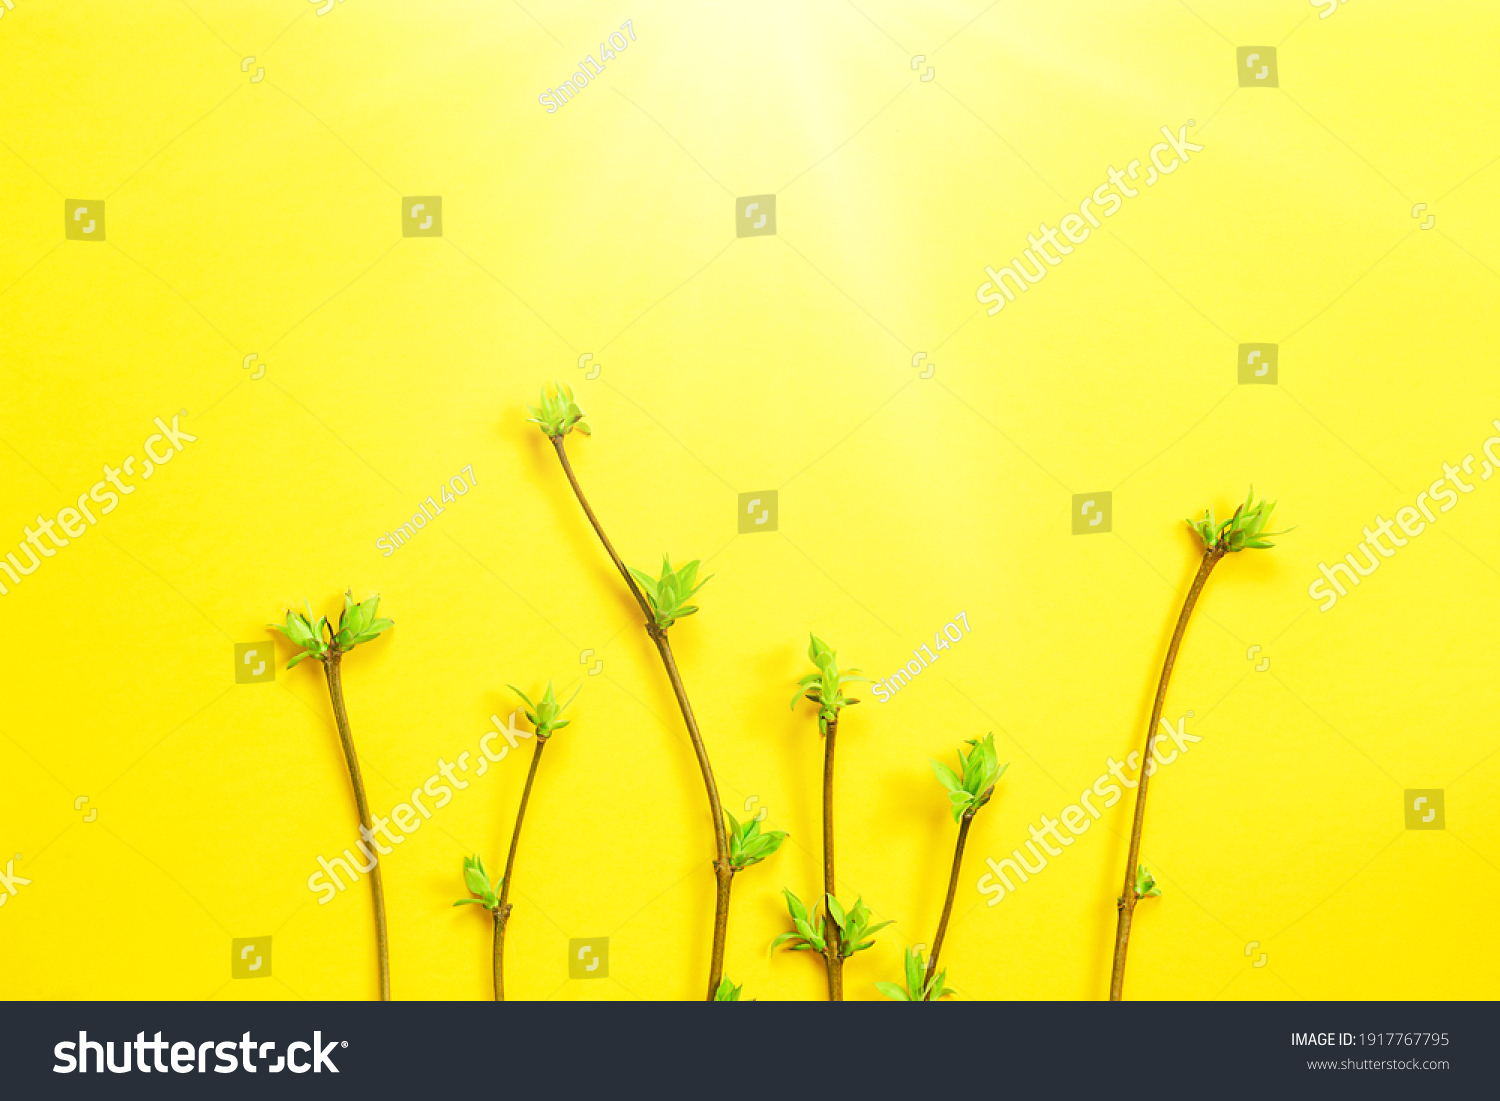 Delicate little leaves from open buds on branches-sprouts on a yellow background. Spring, the beginning of a new life. Copy space #1917767795